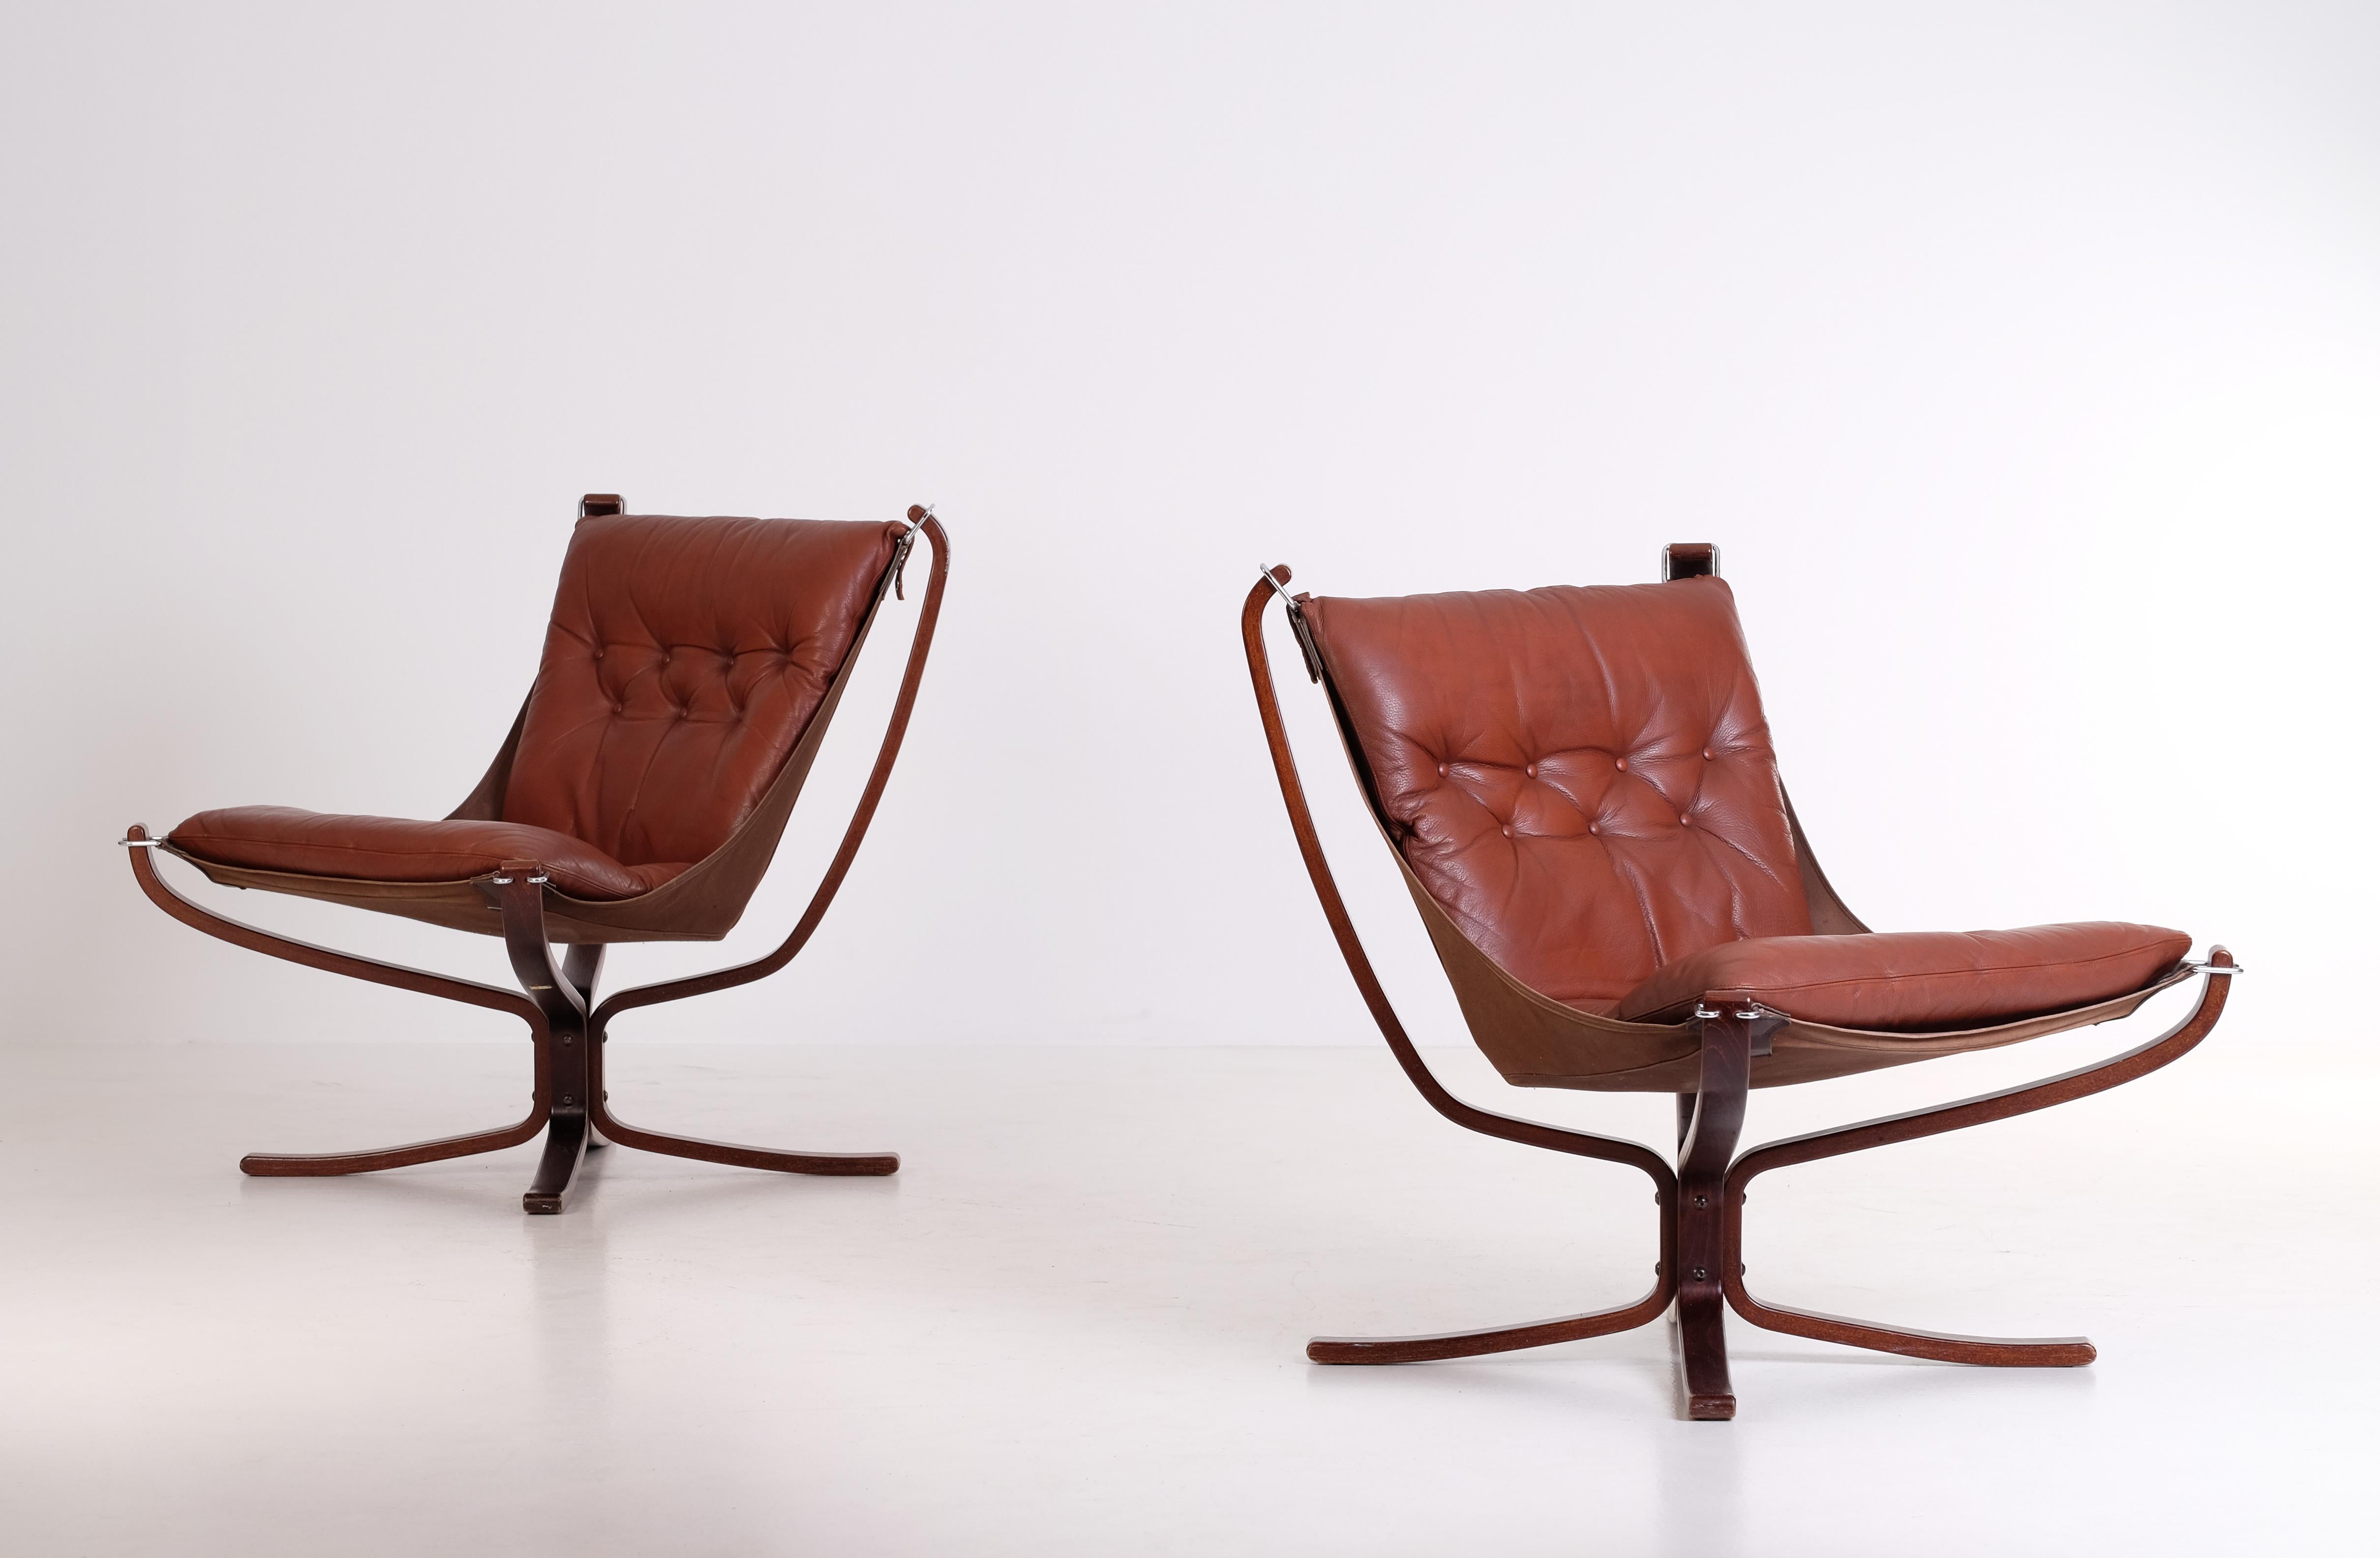 Norwegian Falcon chairs in brown leather by Sigurd Ressel, Norway, 1970s. 
Good vintage condition with signs of usage and patina.
Please note: flat-packed global shipping available: €1000.